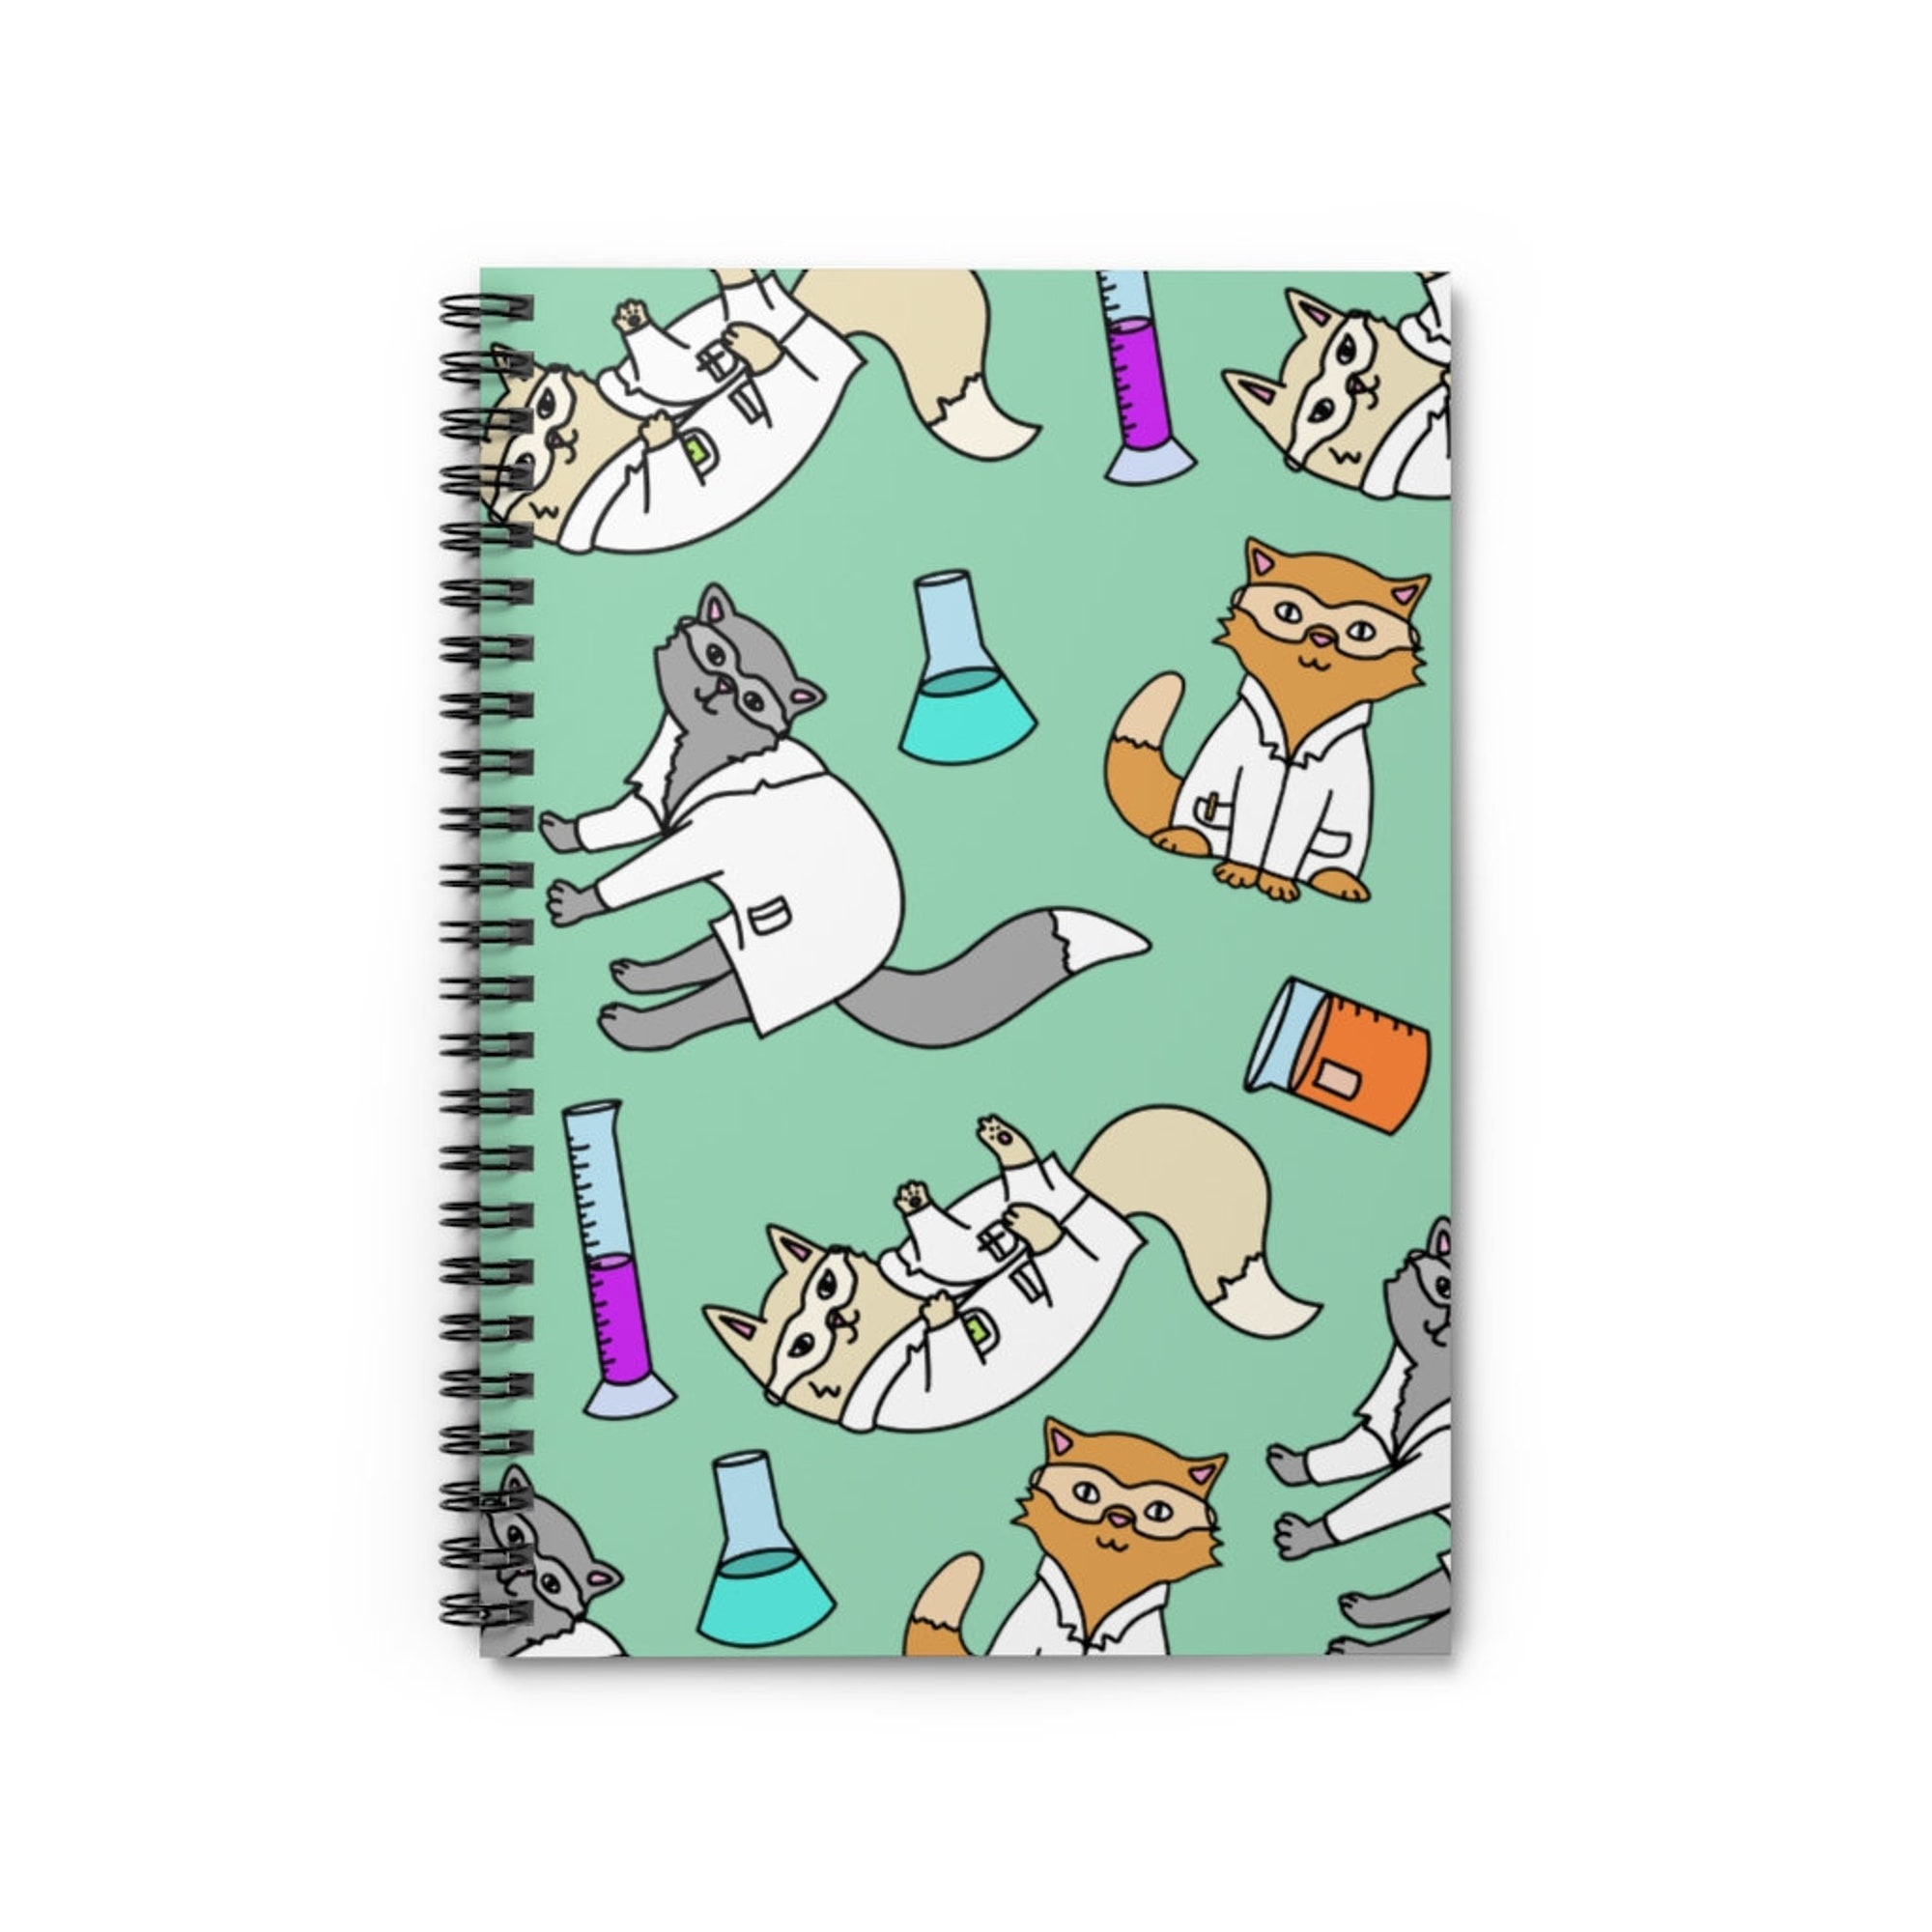 Lab Cats Spiral Notebook - Ruled Line, Science Gifts, Graduation Gift, Laboratory Scientist